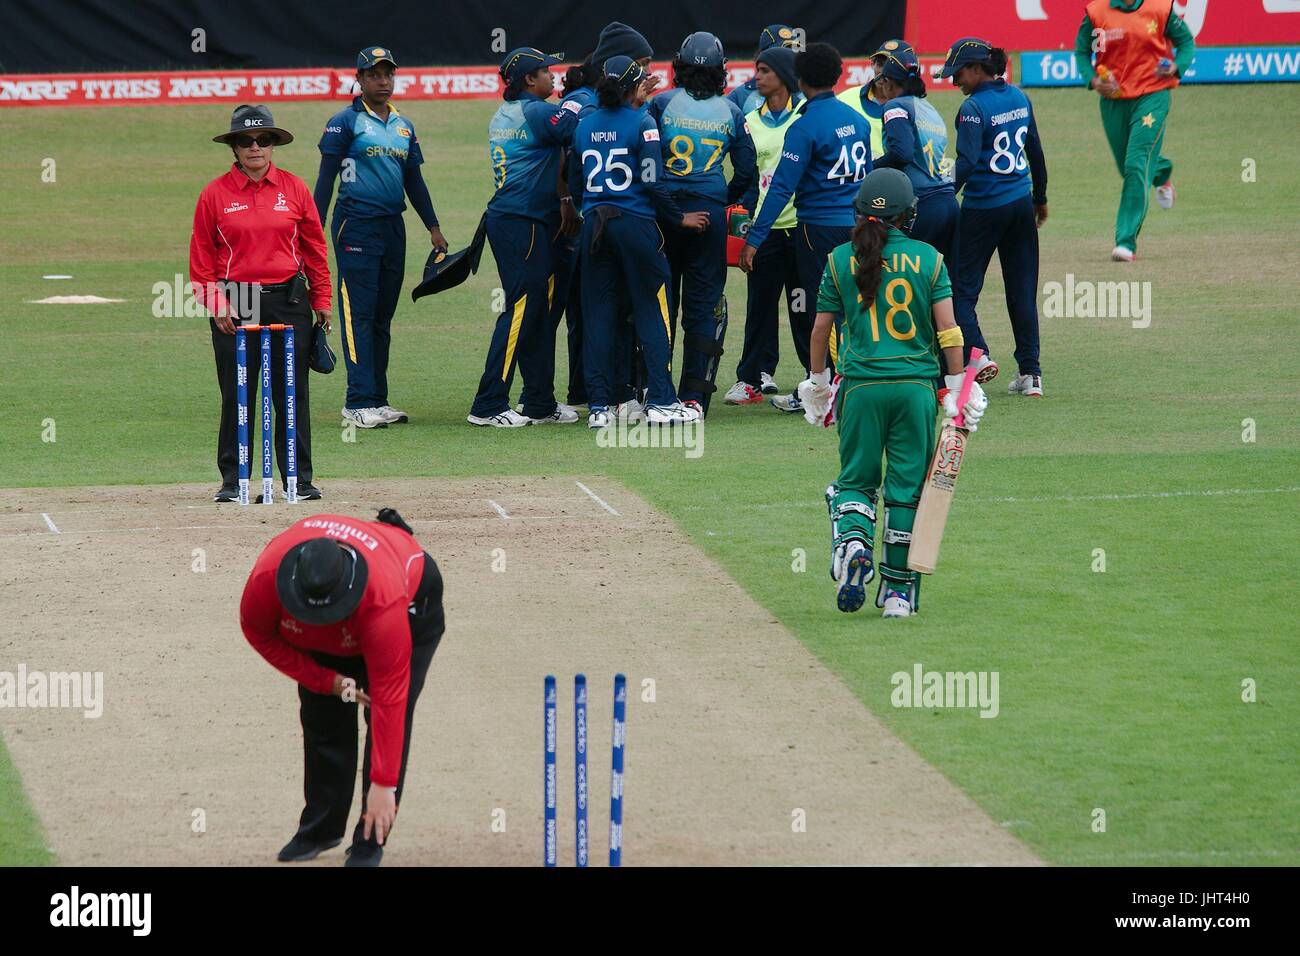 Leicester, England, 15th July 2017. Sri Lanka celebrate the run out of Syeda Nain of Pakistan in the ICC Women’s World Cup 2017 at Grace Road, Leicester. Credit: Colin Edwards/Alamy Live News. Stock Photo